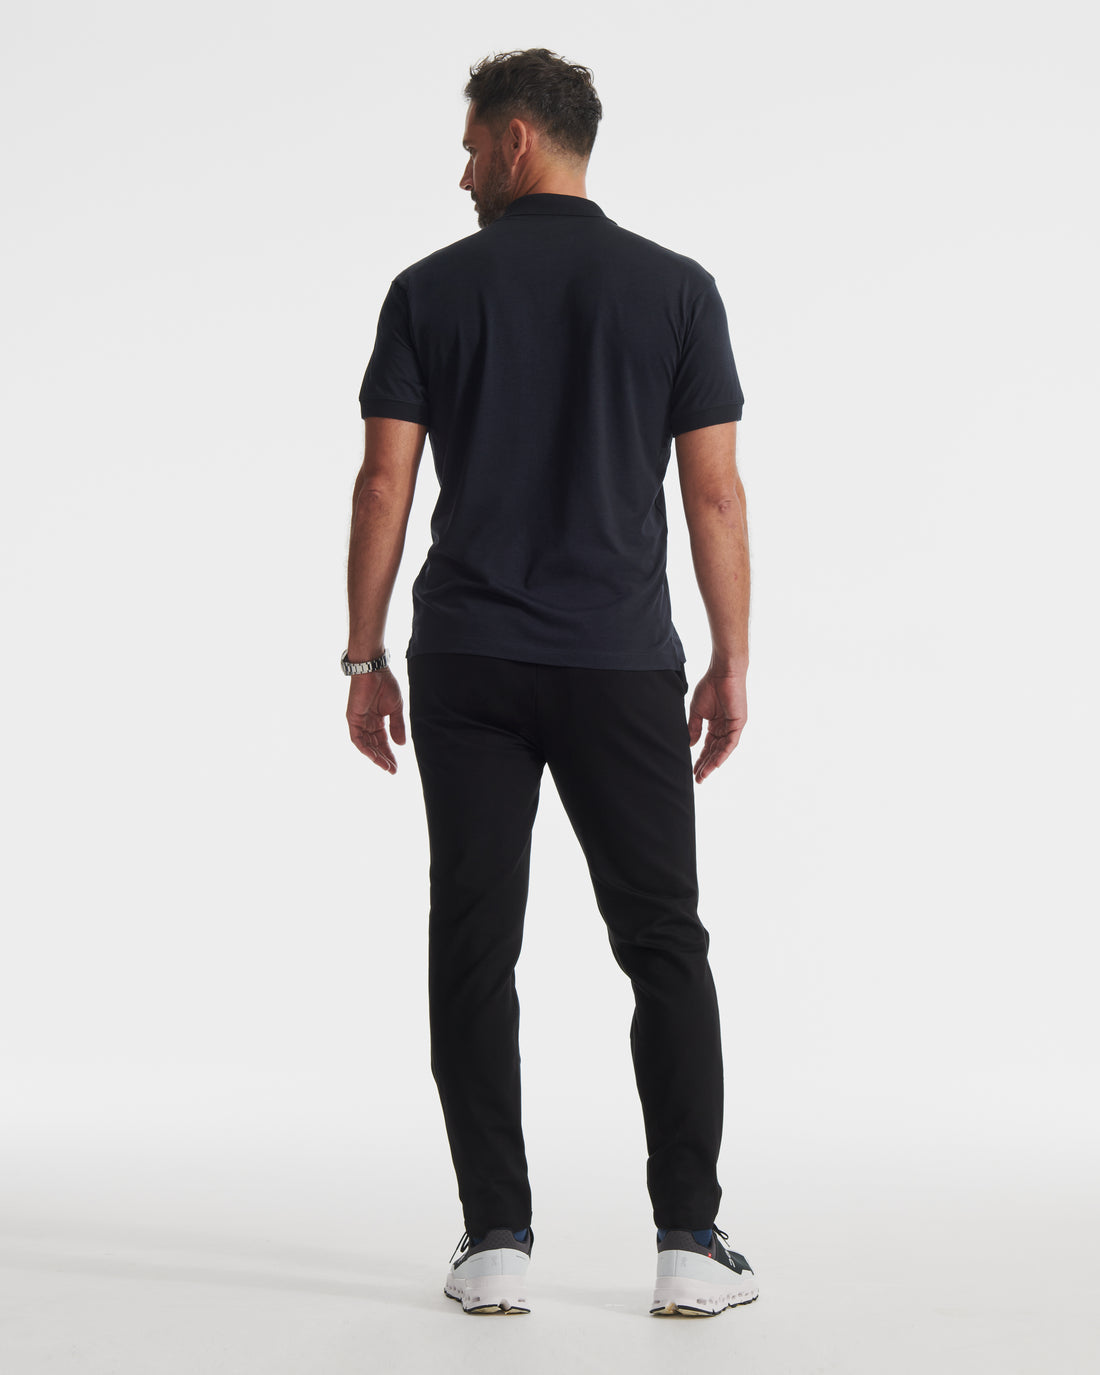 Black Dual Knit Pant | "The Future of Fitness" Men's Health